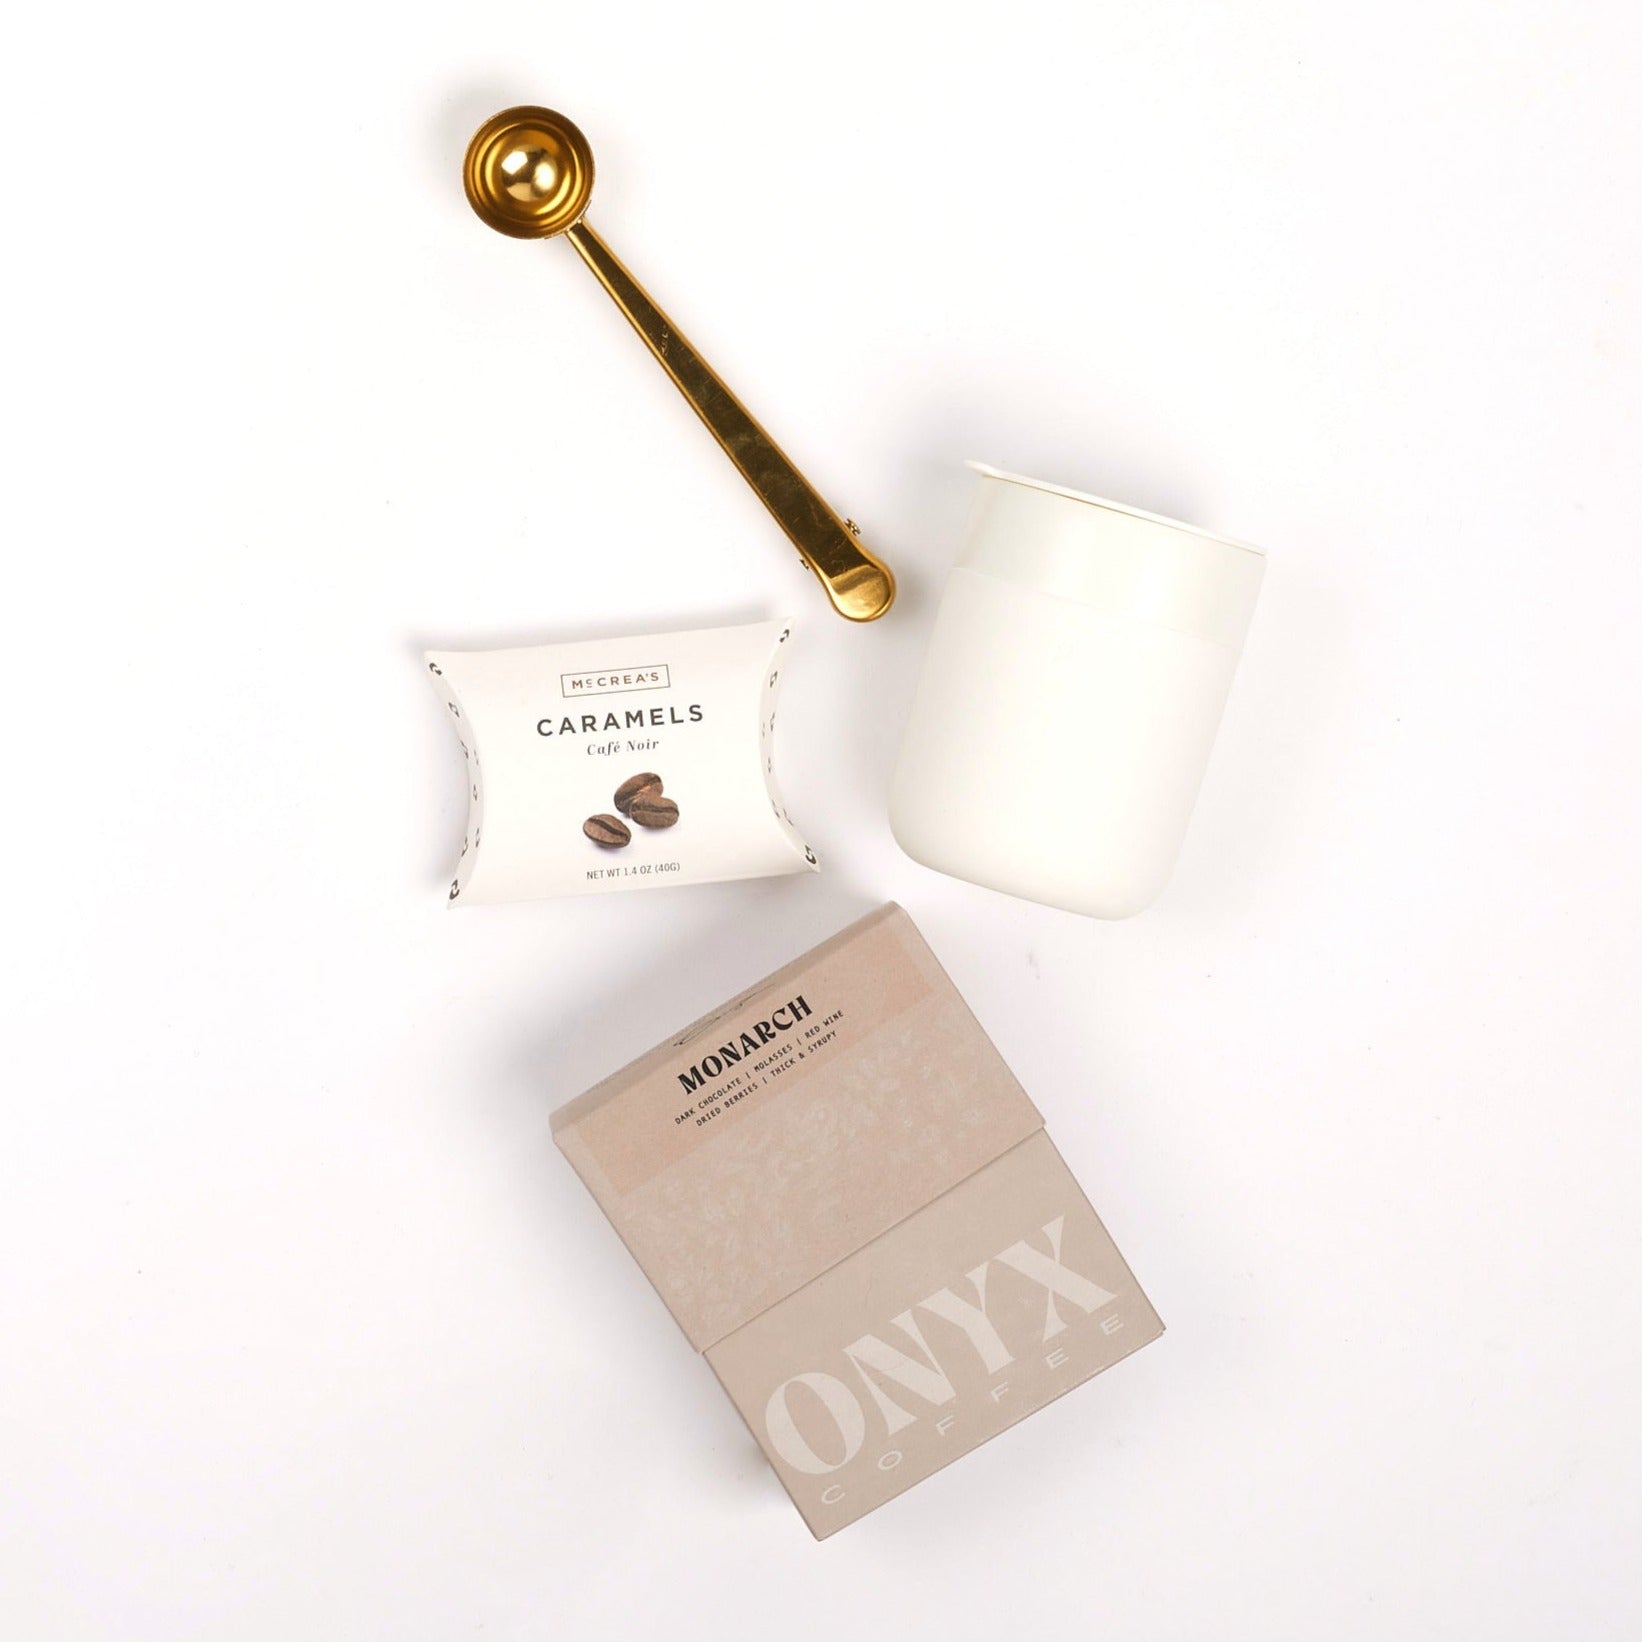 Gold coffee scoop, coffee caramels, cream mug and box of coffee on white background